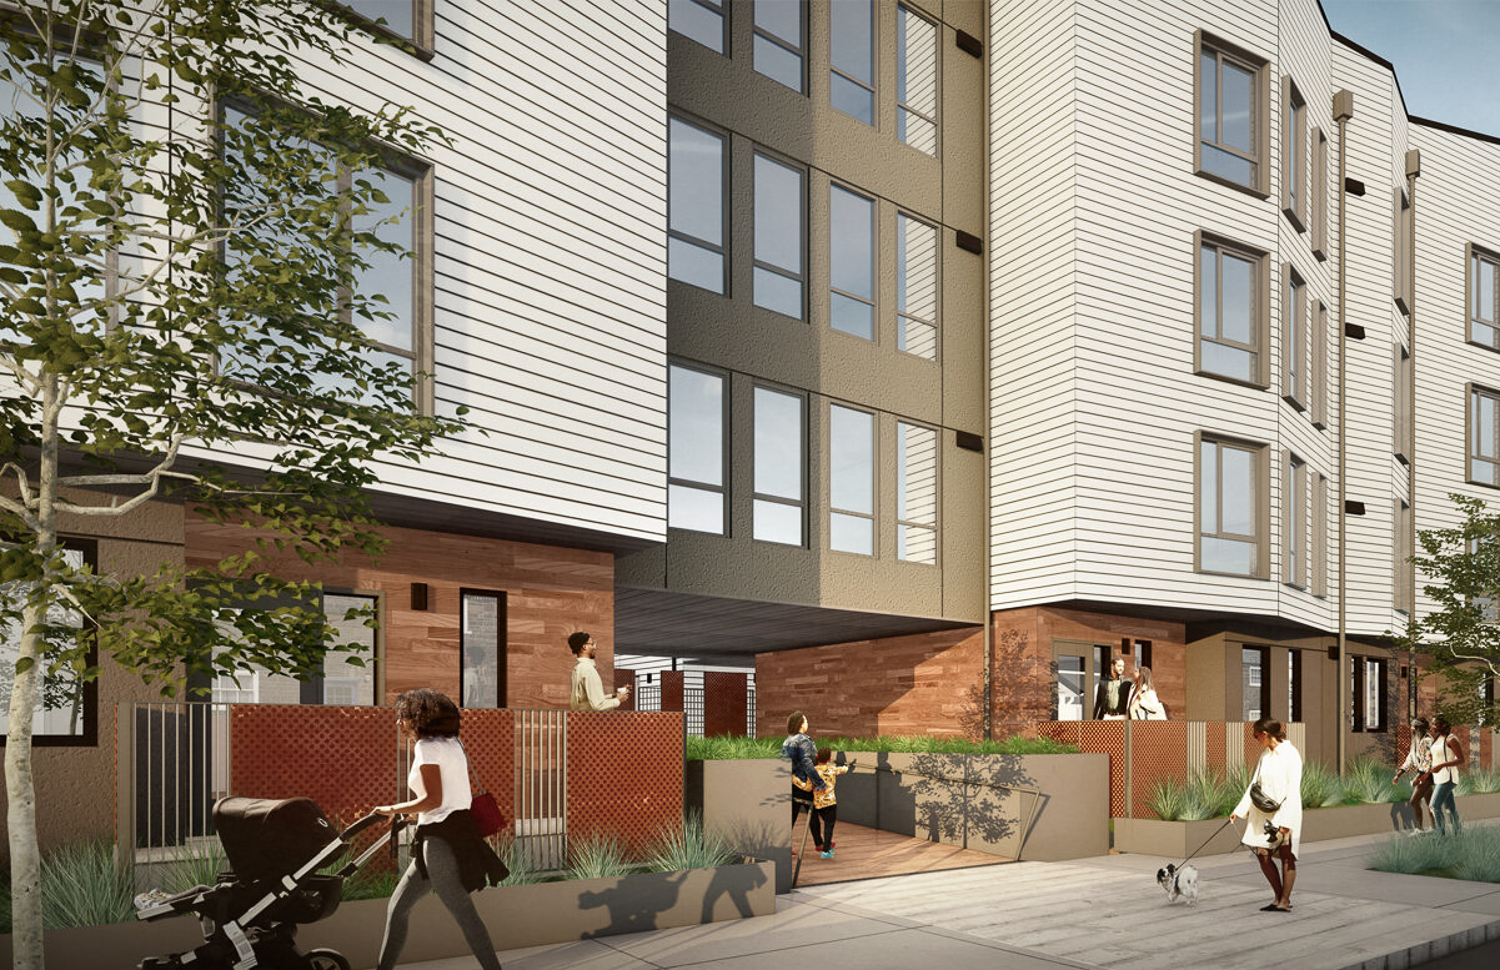 Shirley Chisholm Village Educator Housing entry, rendering by BAR Architecture